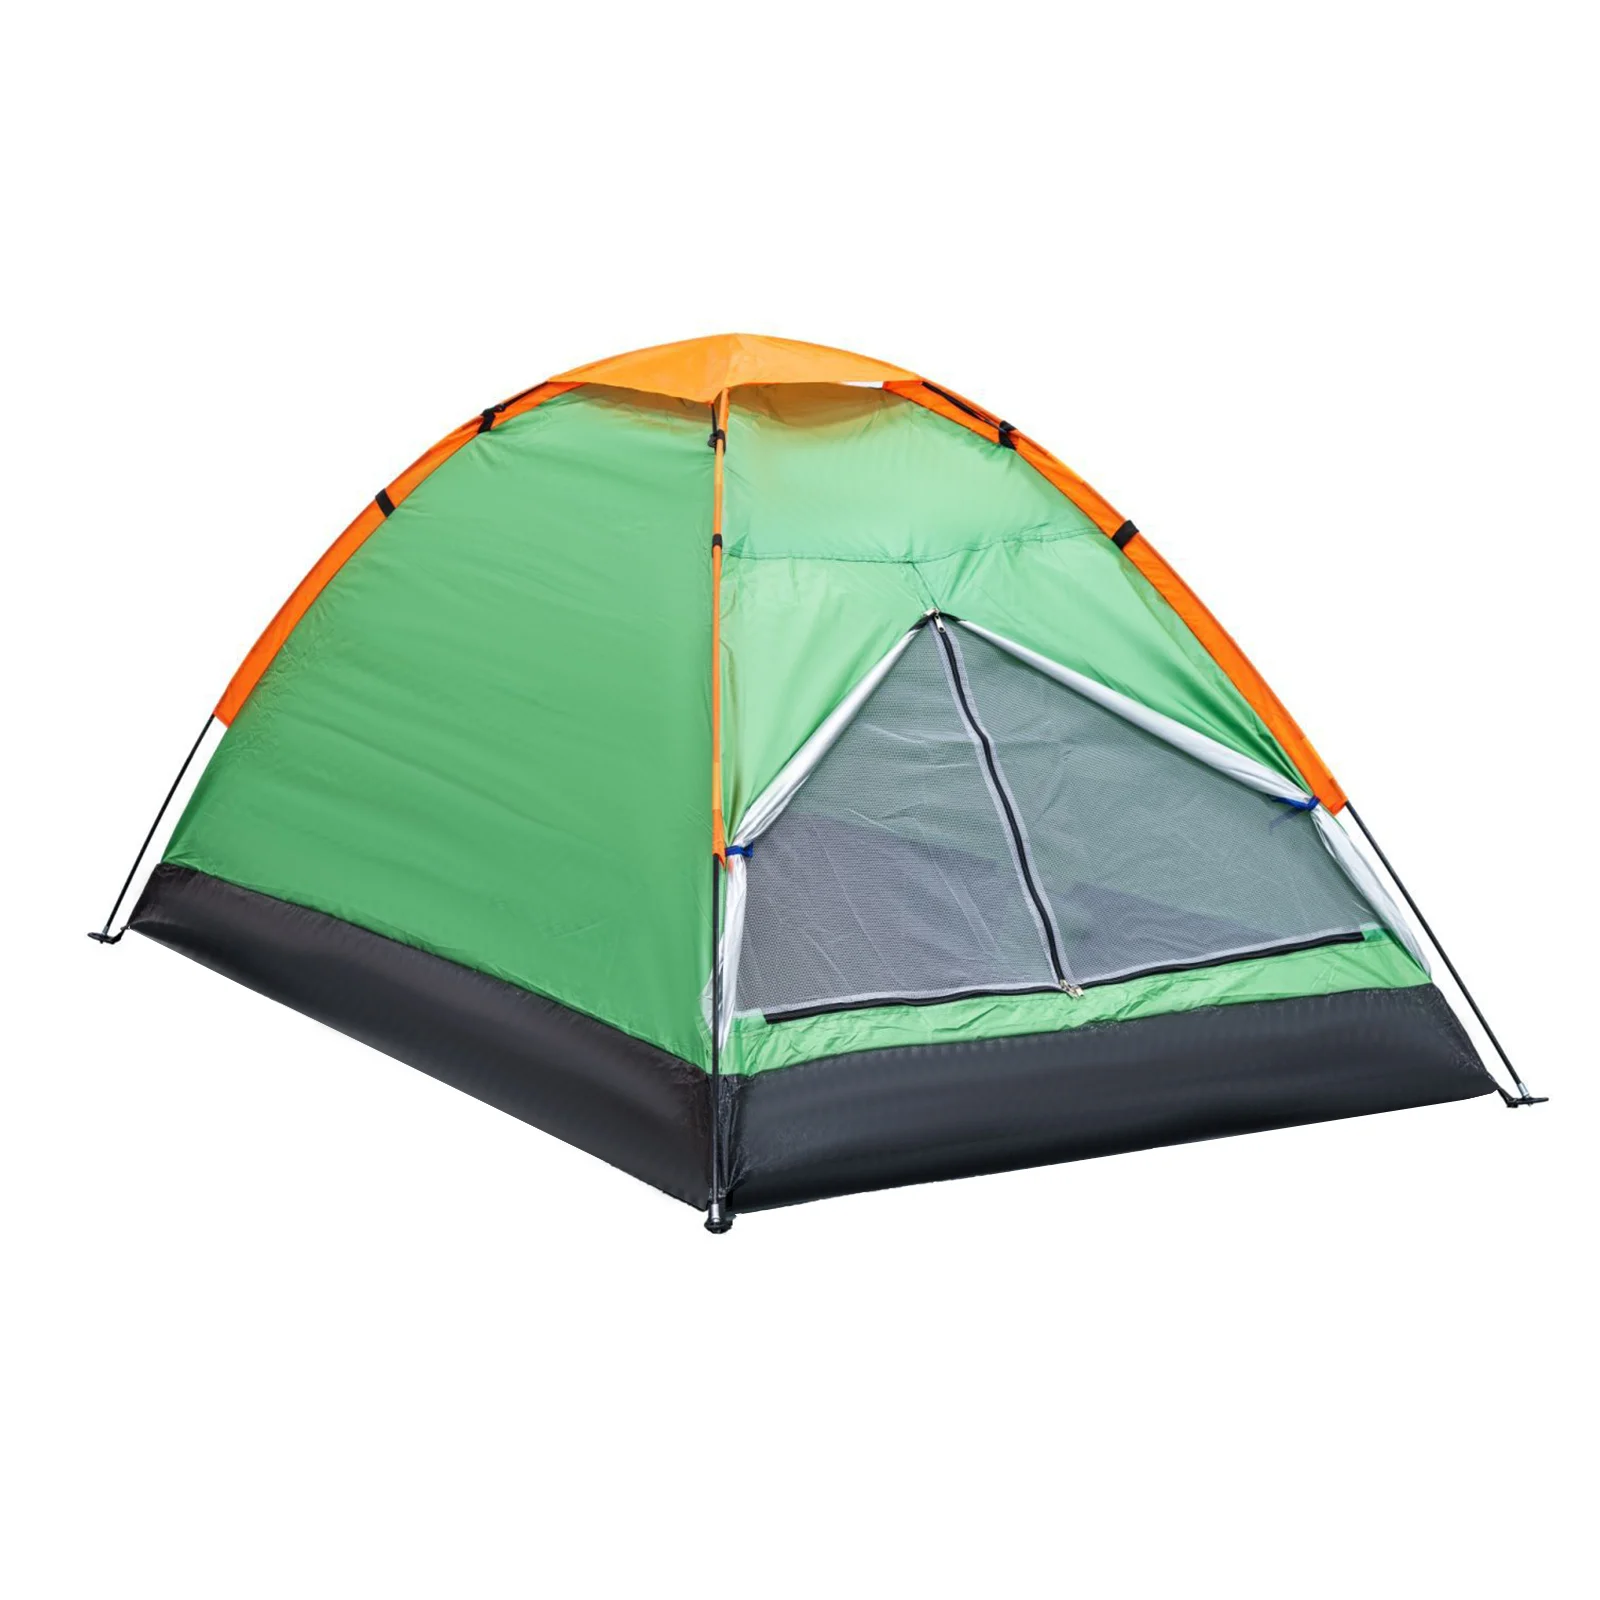 

Canopies Tent With Rain Fly Wakeman With Carrying Bag 190T Polyester 2-Person Backpacking Camping Compact Beach